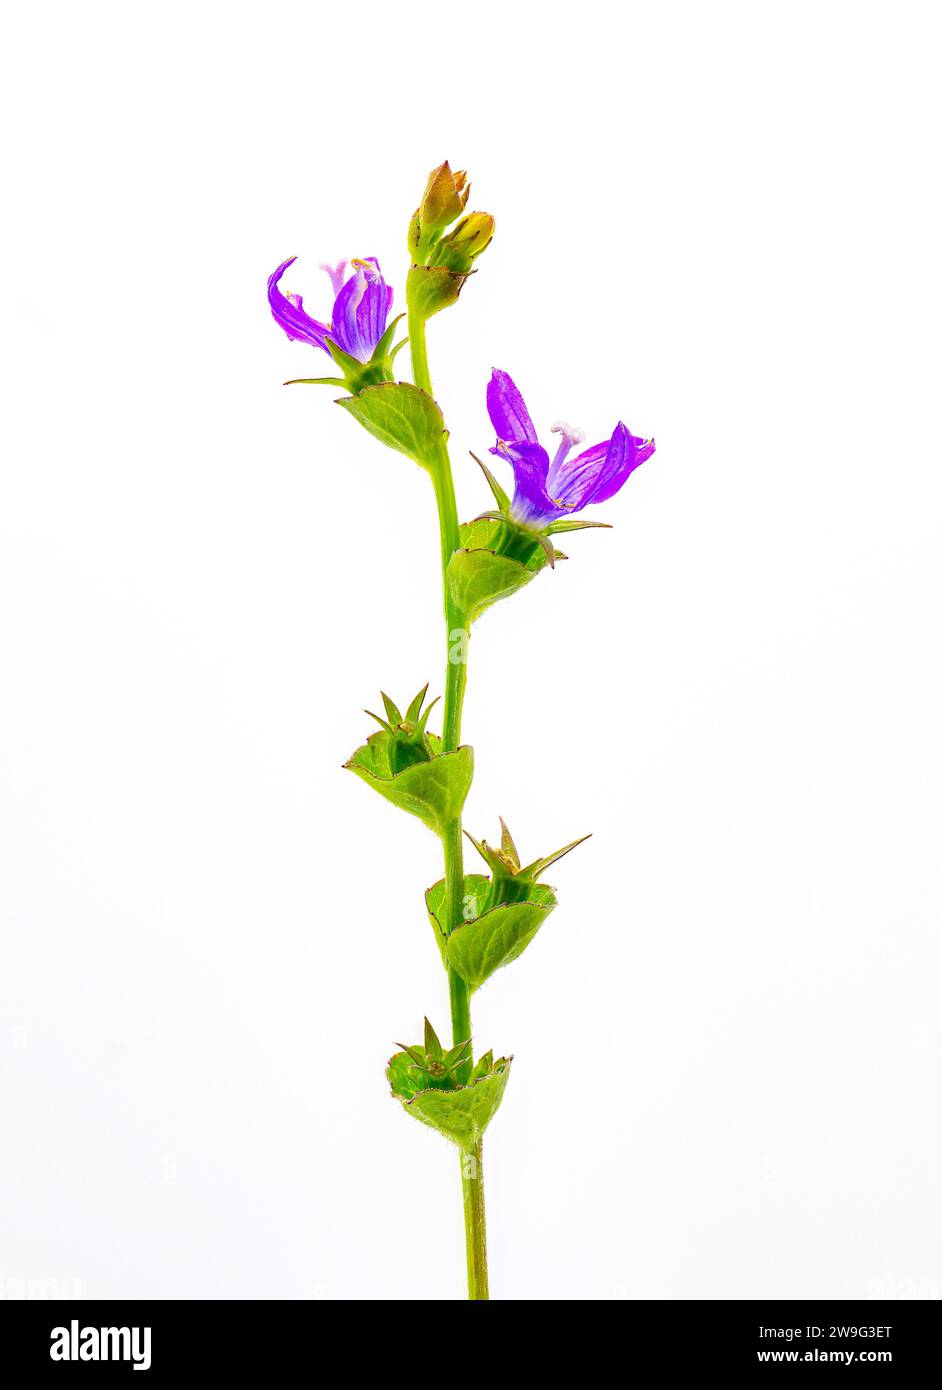 Venus’s Looking Glass - Triodanis perfoliata - Bellflower family, purple flower, green cup shaped leaves isolated on white background Stock Photo